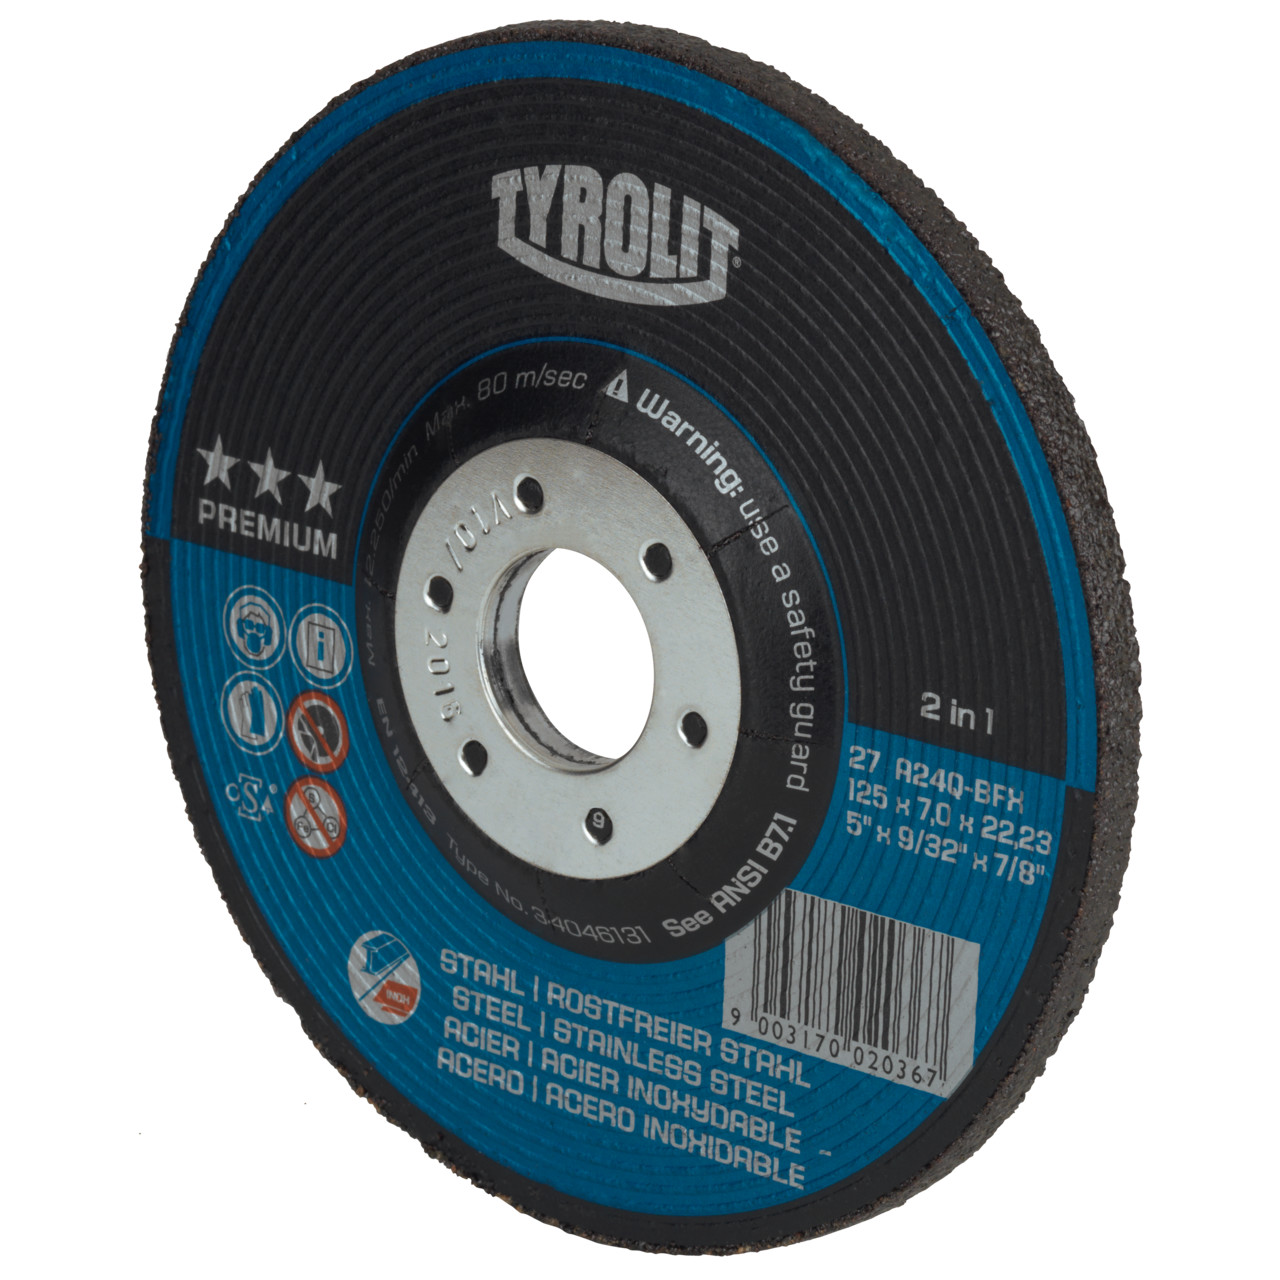 TYROLIT grinding wheel DxUxH 178x4x22.23 2in1 for steel and stainless steel, shape: 27 - offset version, Art. 5349